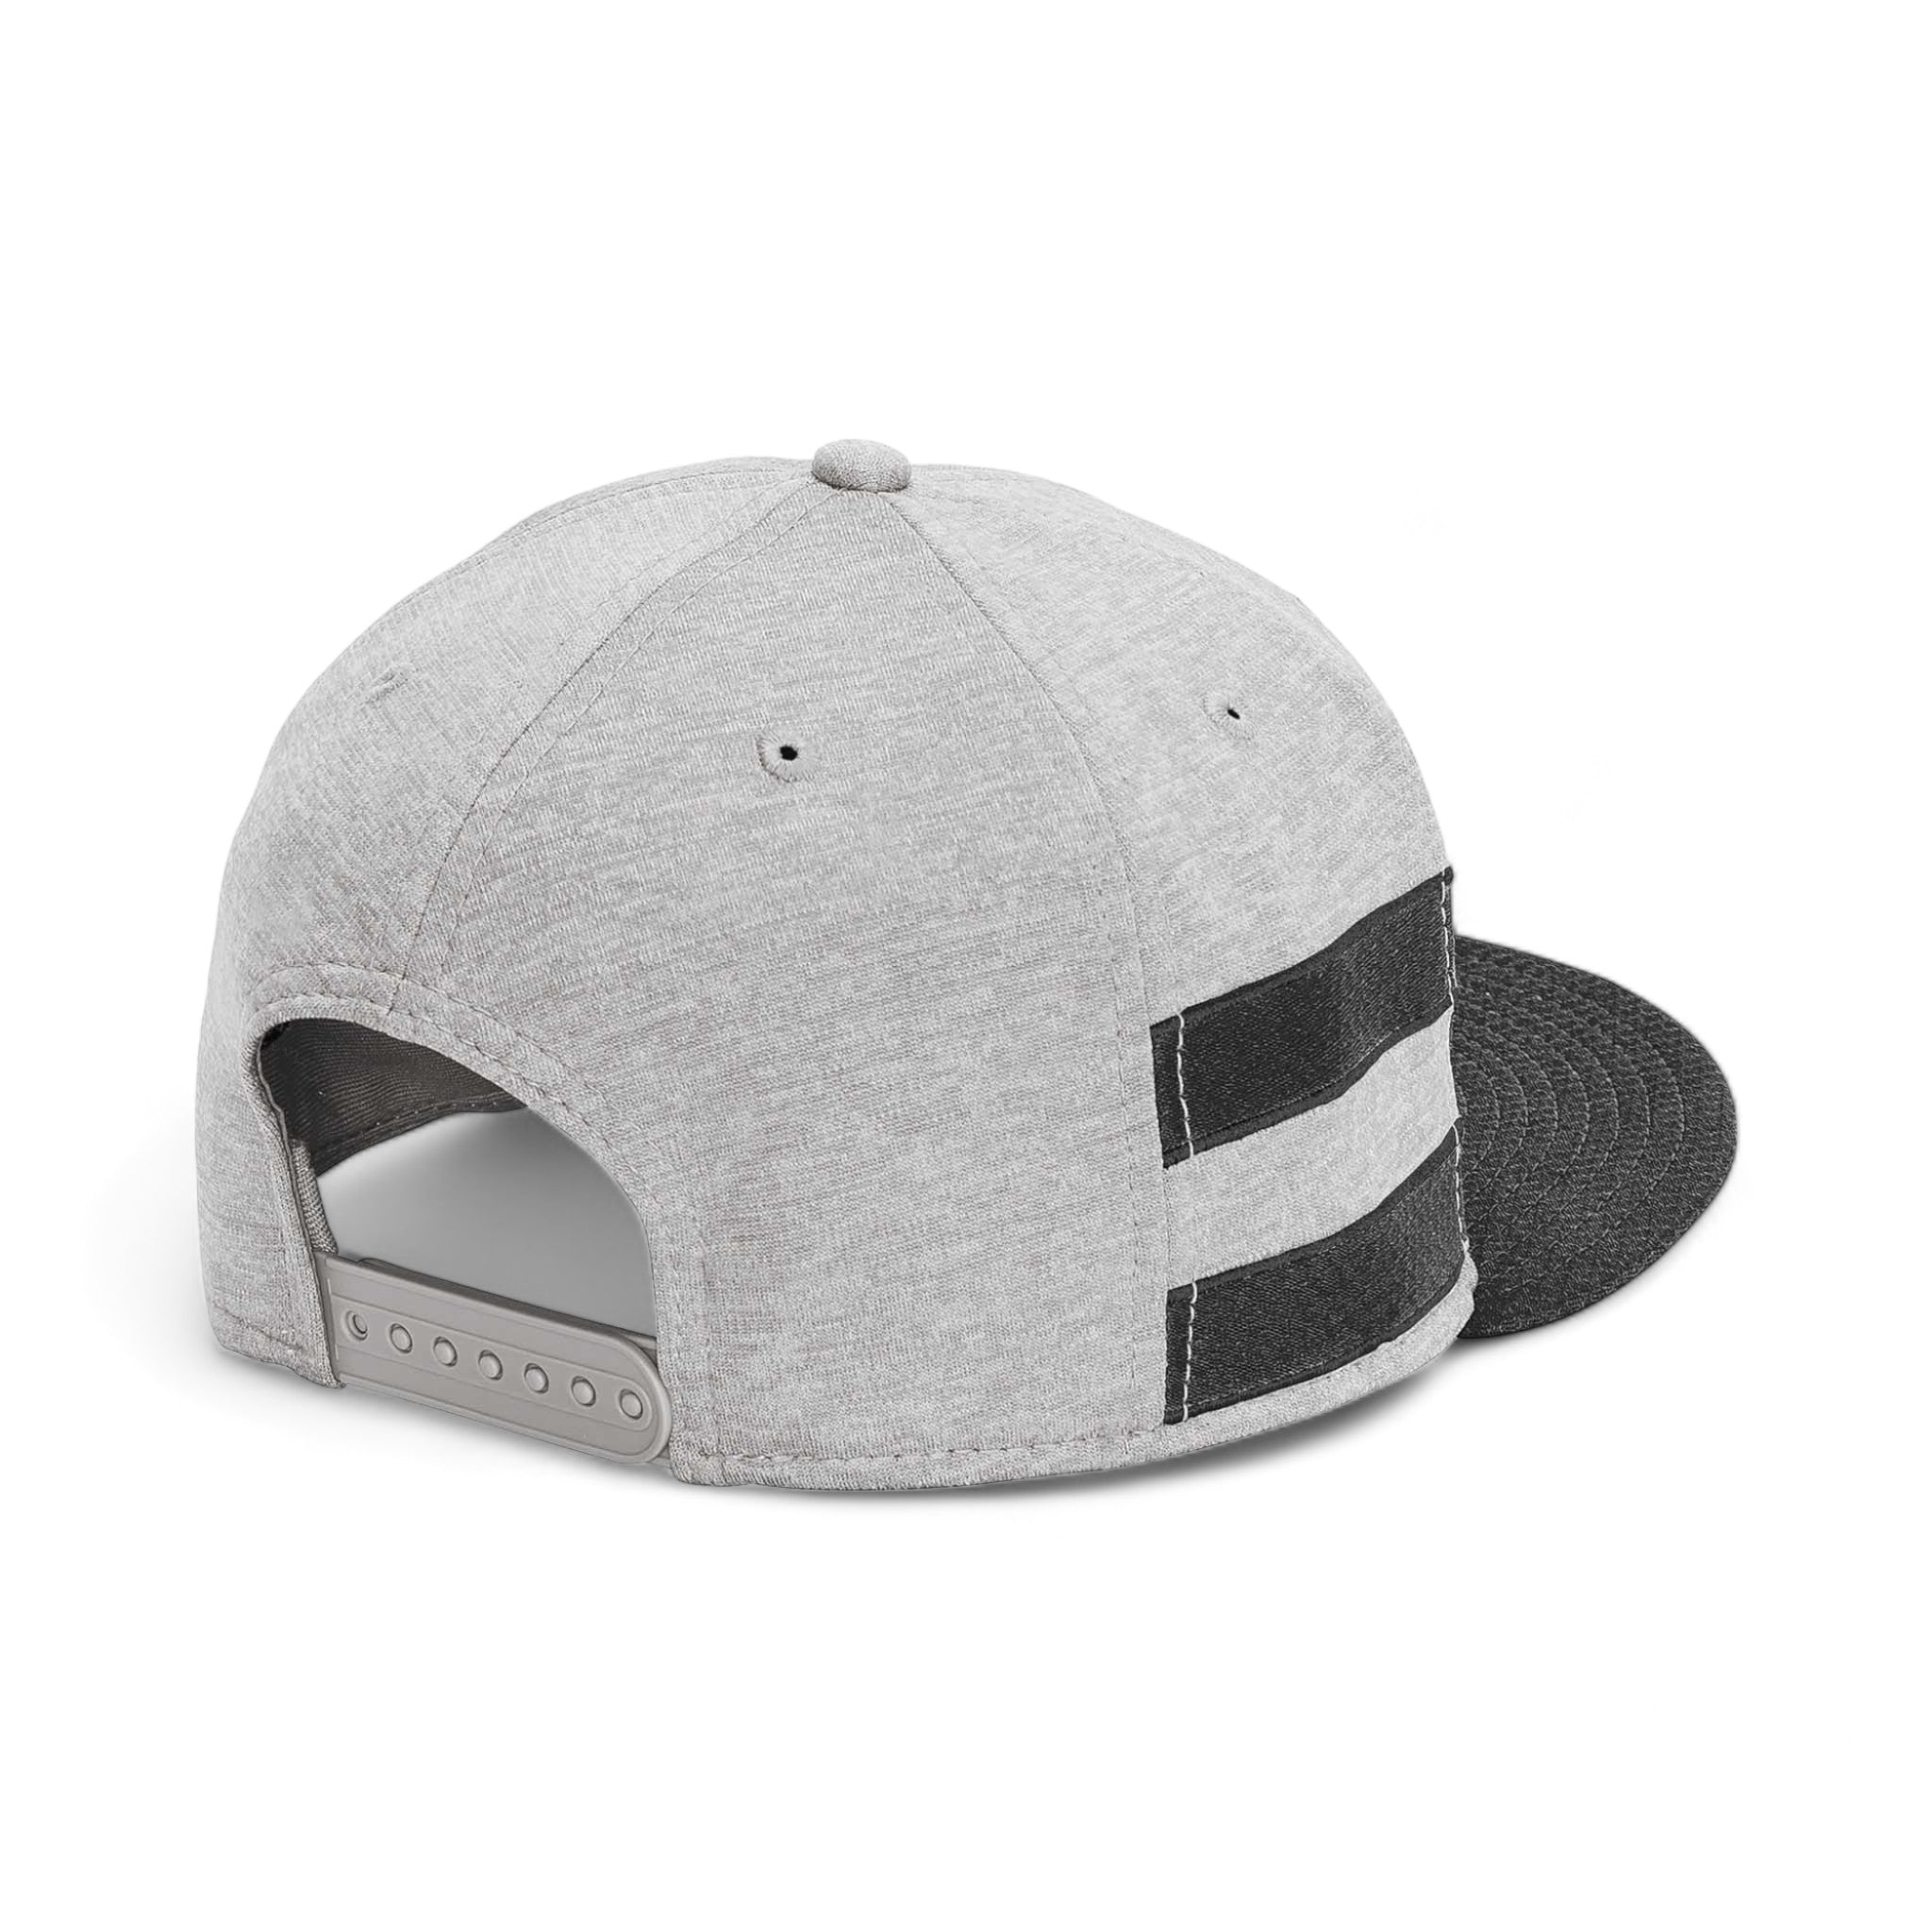 Back view of New Era NE408 custom hat in shadow heather and black